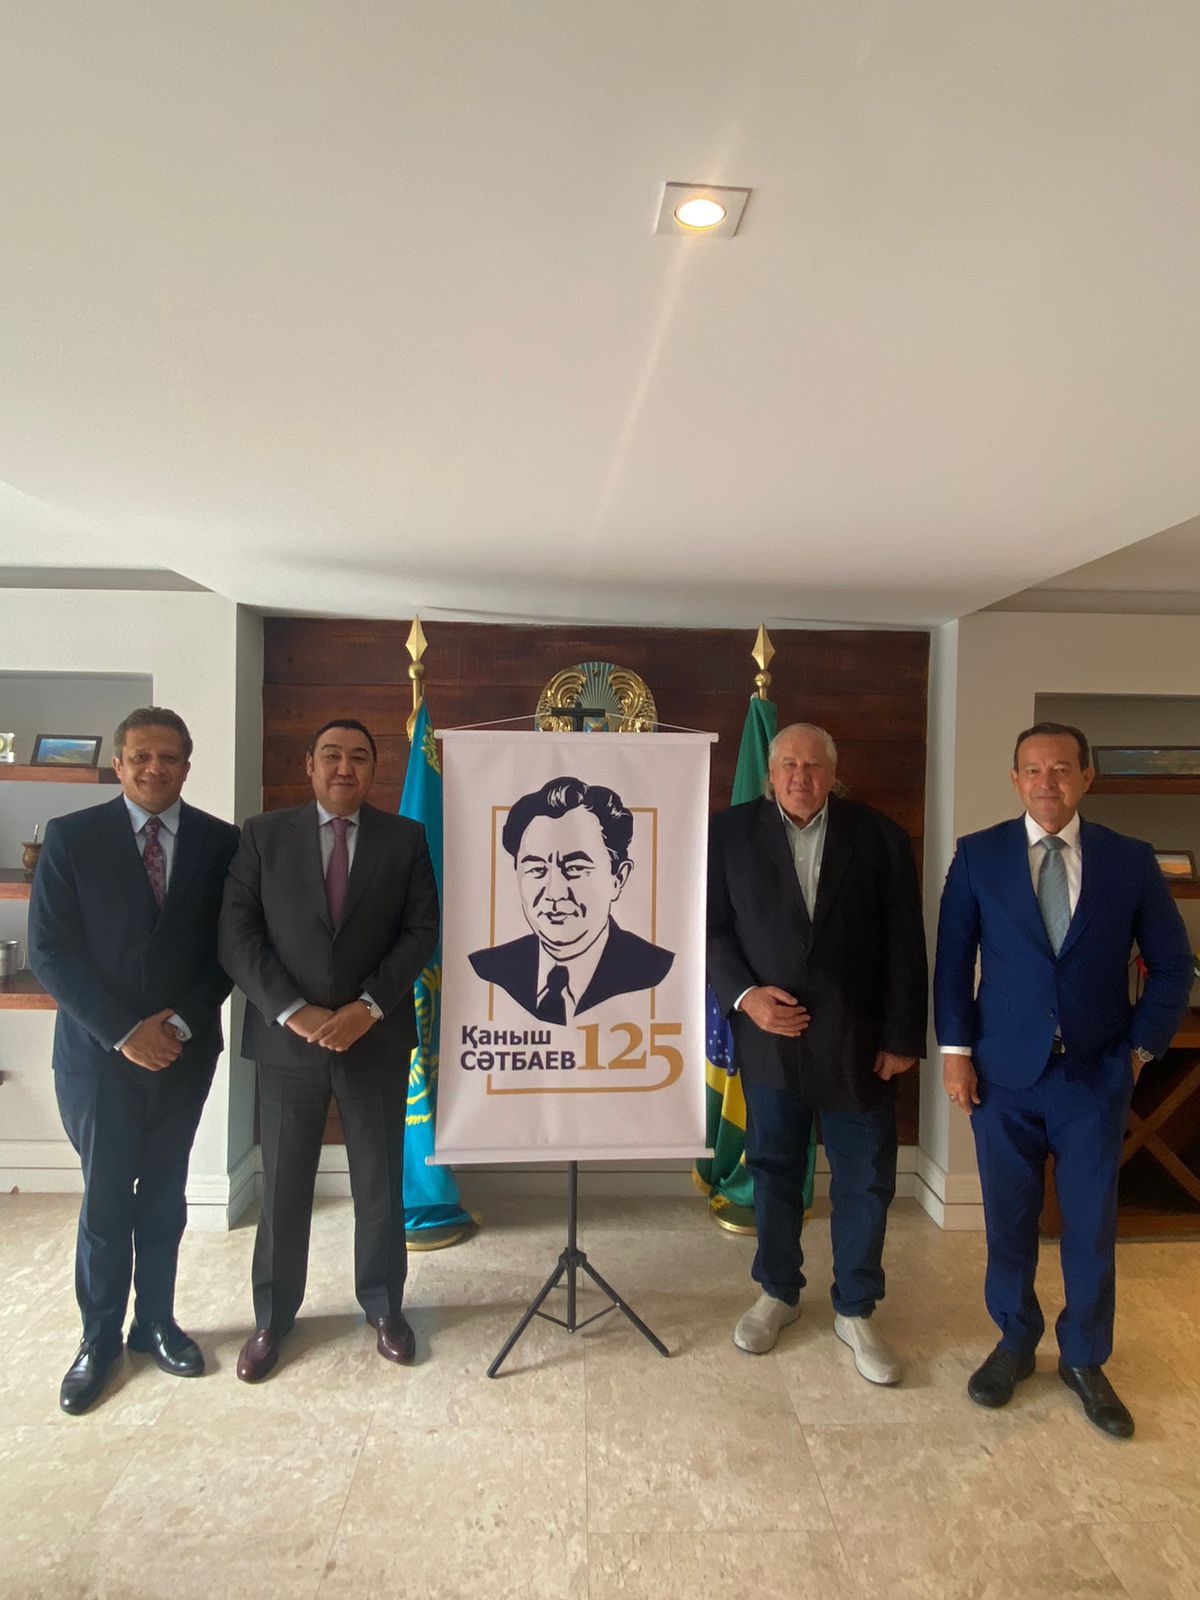 The 125th anniversary  of Kanysh Satbayev was celebrated in Brazil